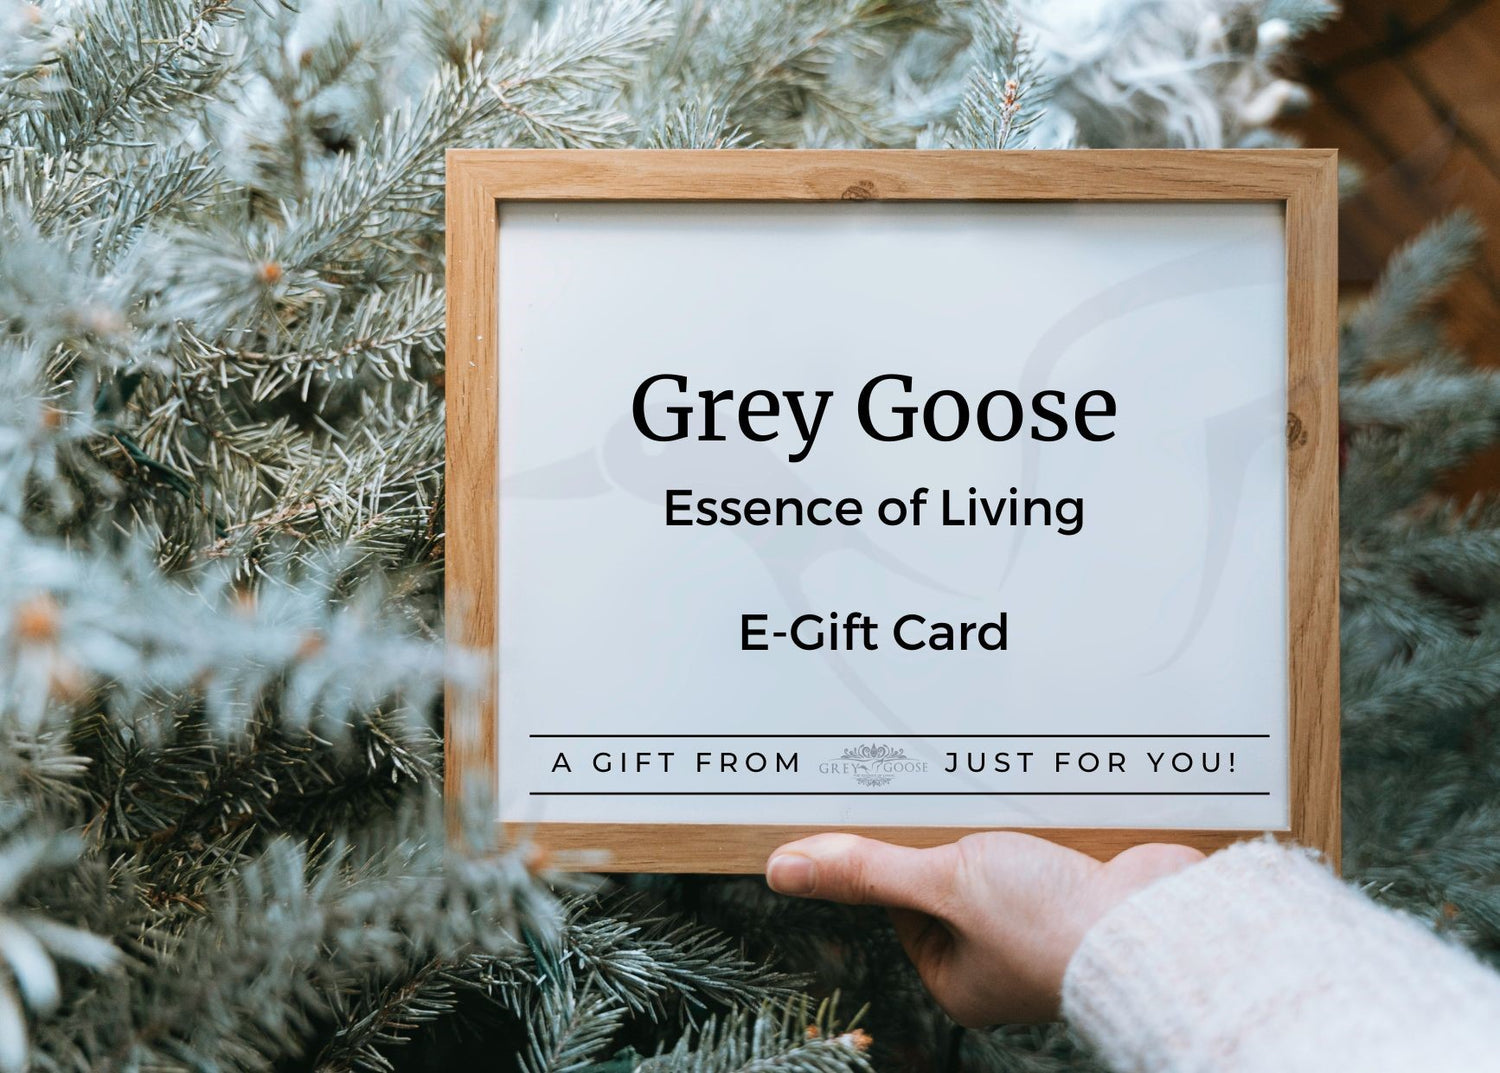 Gifts - E-Gift Card